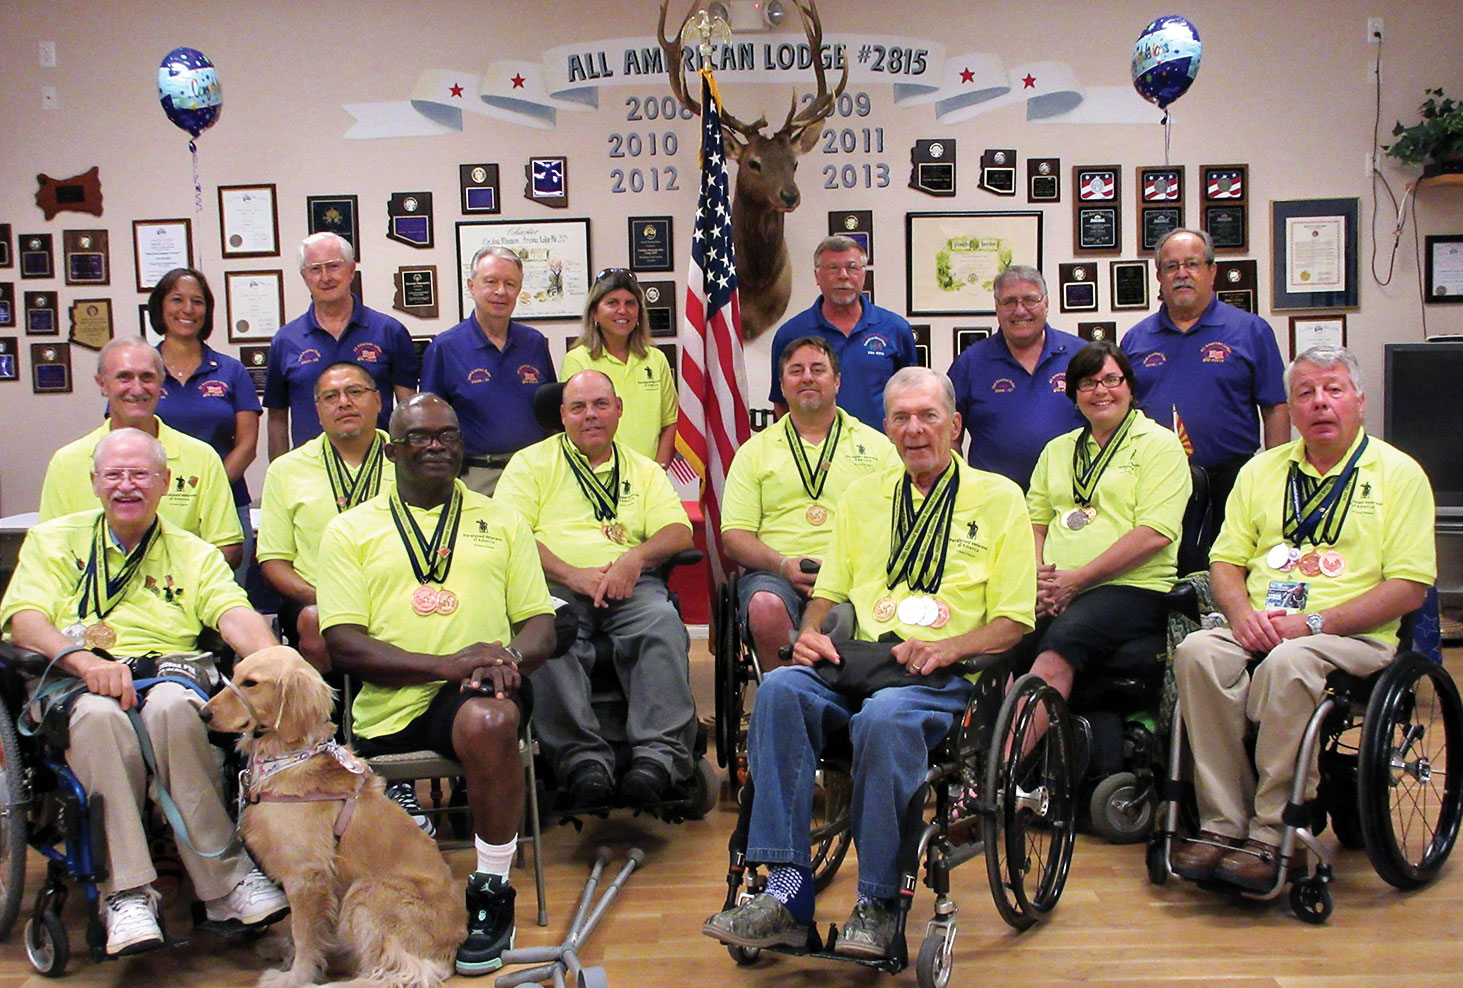 From left, front row: Joe Chitty, Arthur Parson, Jack Grams; second row: Paul Carter, Larry Moses, Leslie Craddock, Steve O’Brien, Pam Foley, Steve Hymers; back row: PERs Gloria Cisneros, Jim Cox and Larry Megahan, Arizona veterans. Wheelchair Games coach Karen Gialle, PERs Earnest Cruce, Jack Baillargeon and Richard Esparza